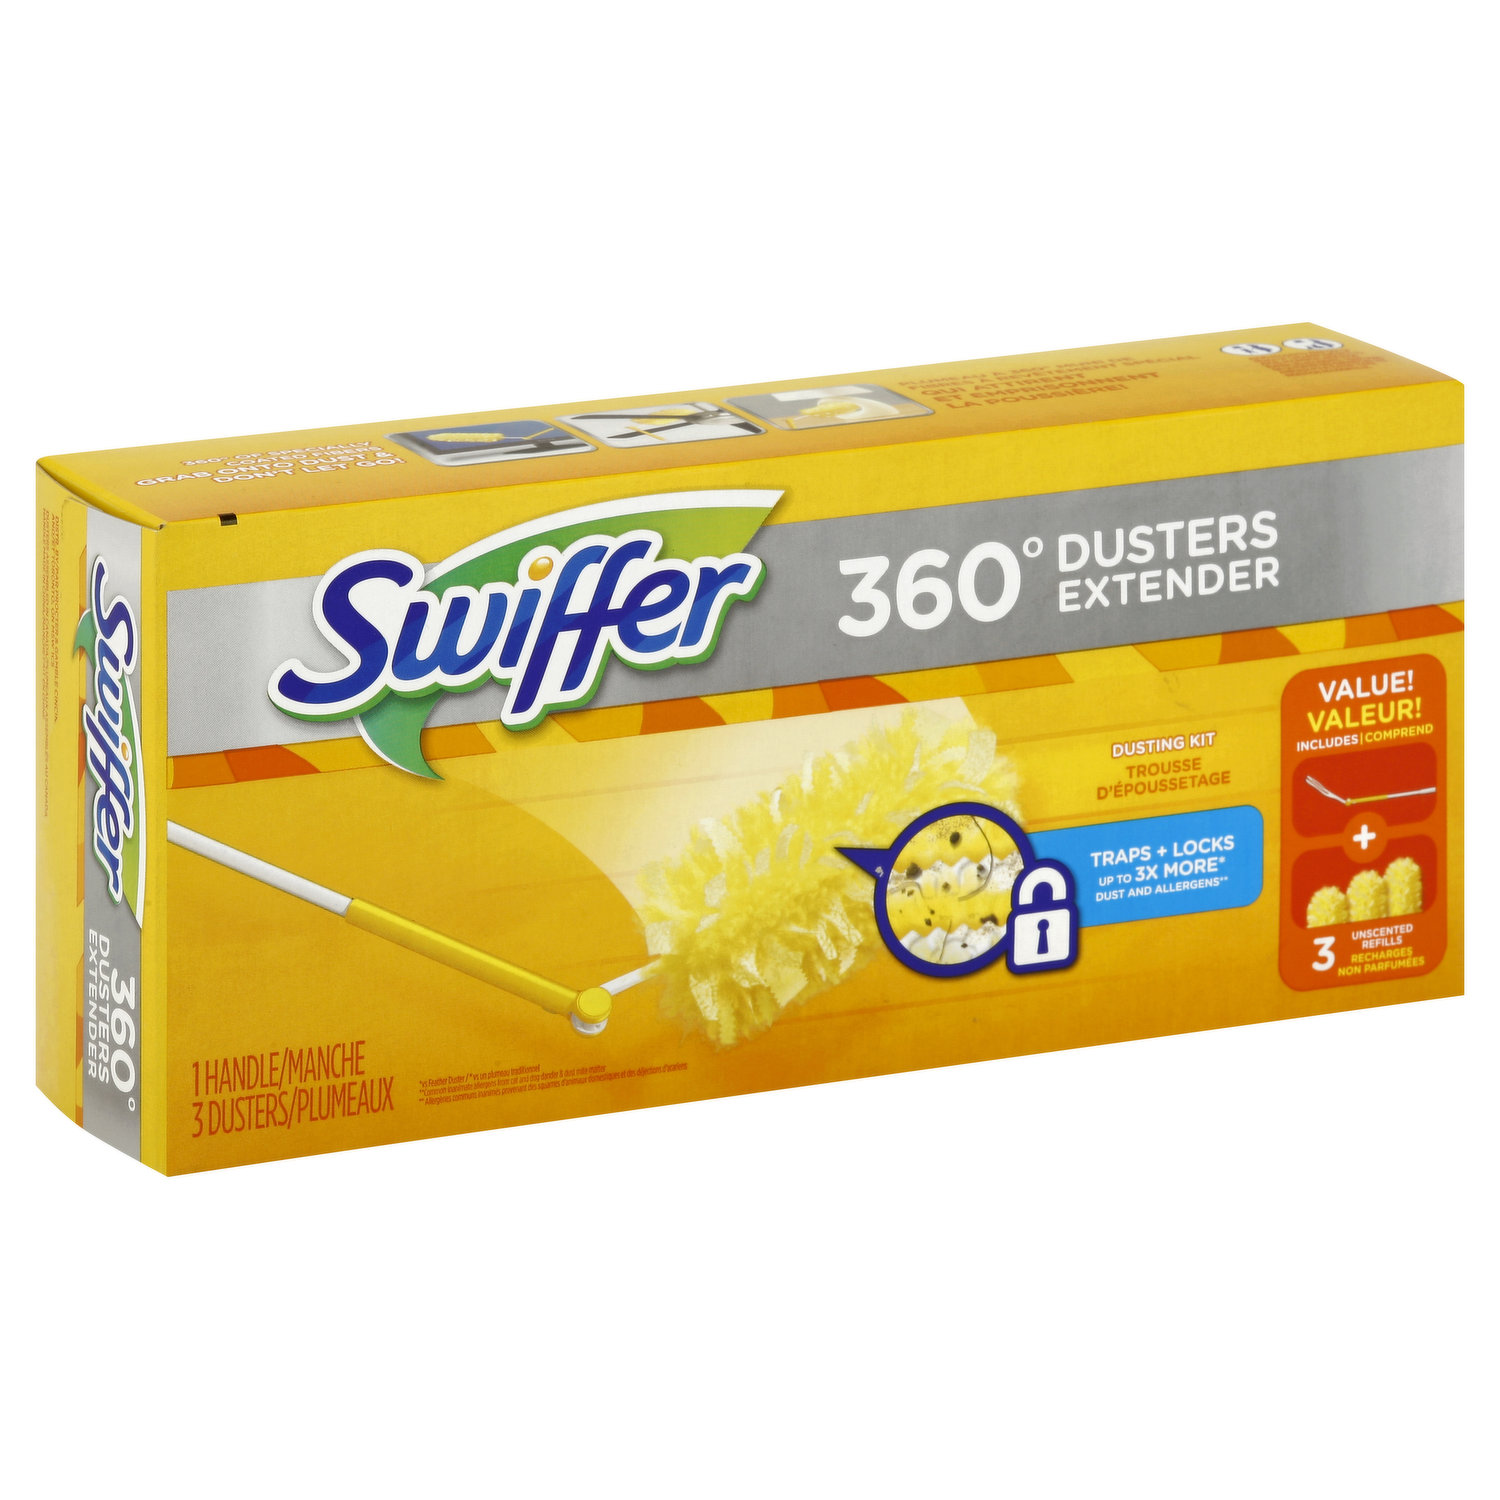 Swiffer 360 Dusters, Plastic Handle Extends to 3 ft, 1